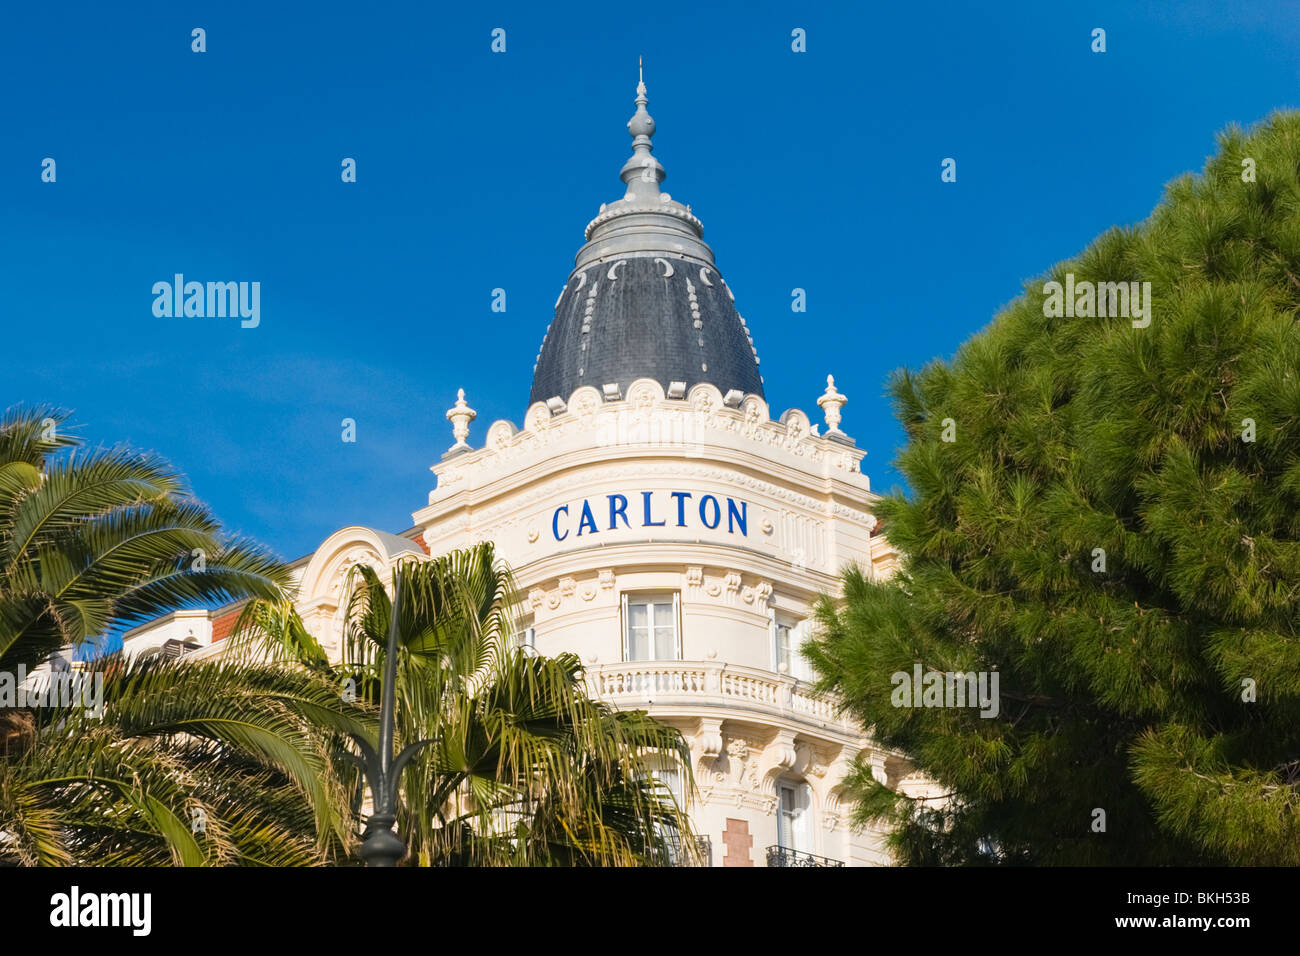 Cannes , La Croisette , view of detail of the Carlton Inter Continental Hotel through the trees & palms Stock Photo